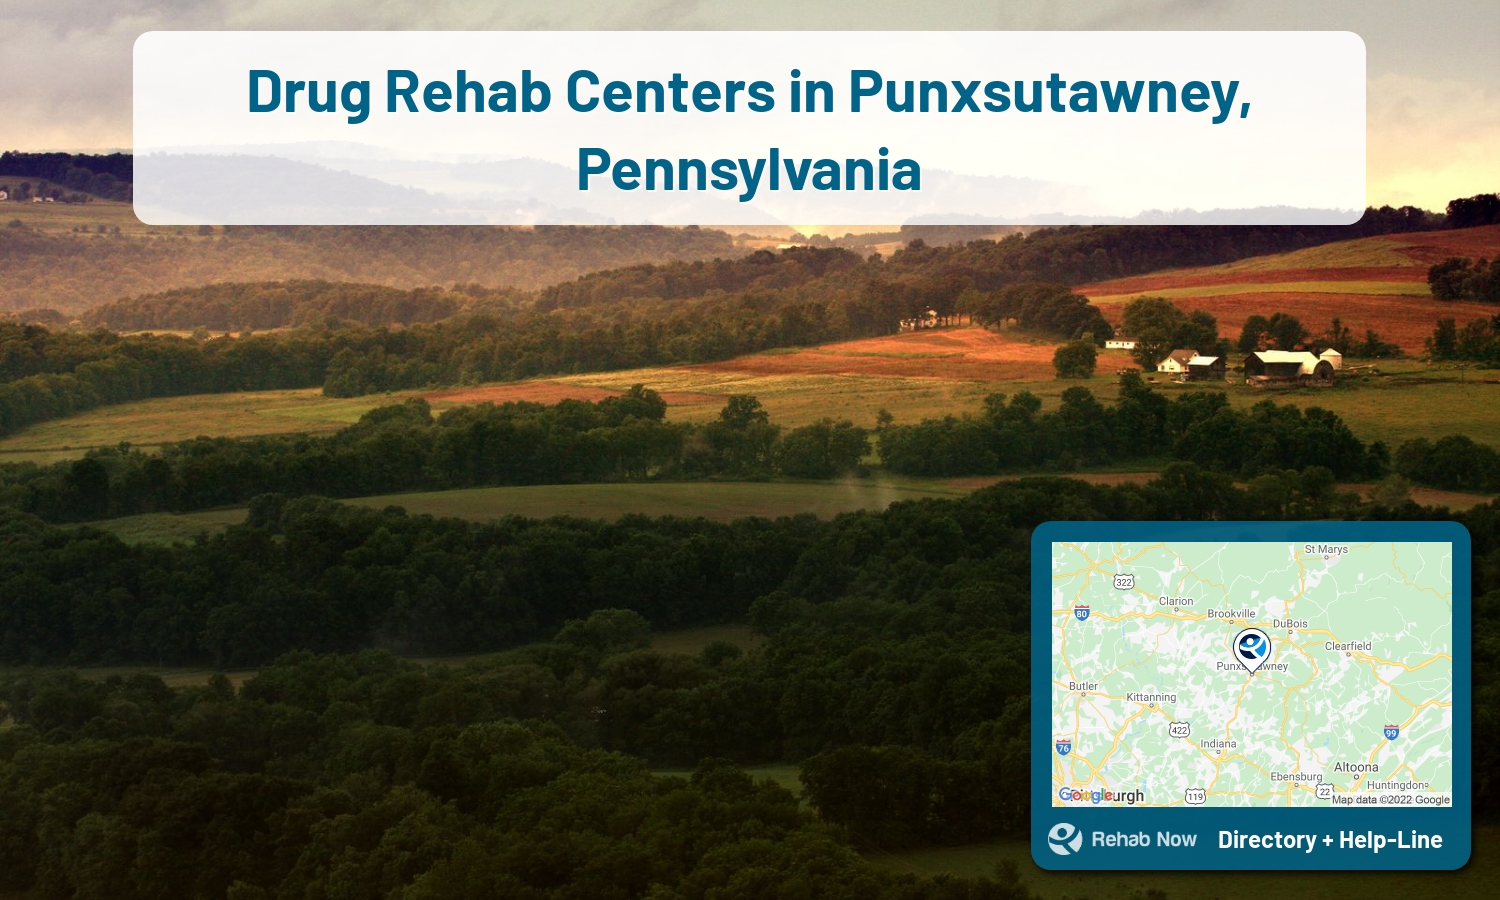 Find drug rehab and alcohol treatment services in Punxsutawney. Our experts help you find a center in Punxsutawney, Pennsylvania